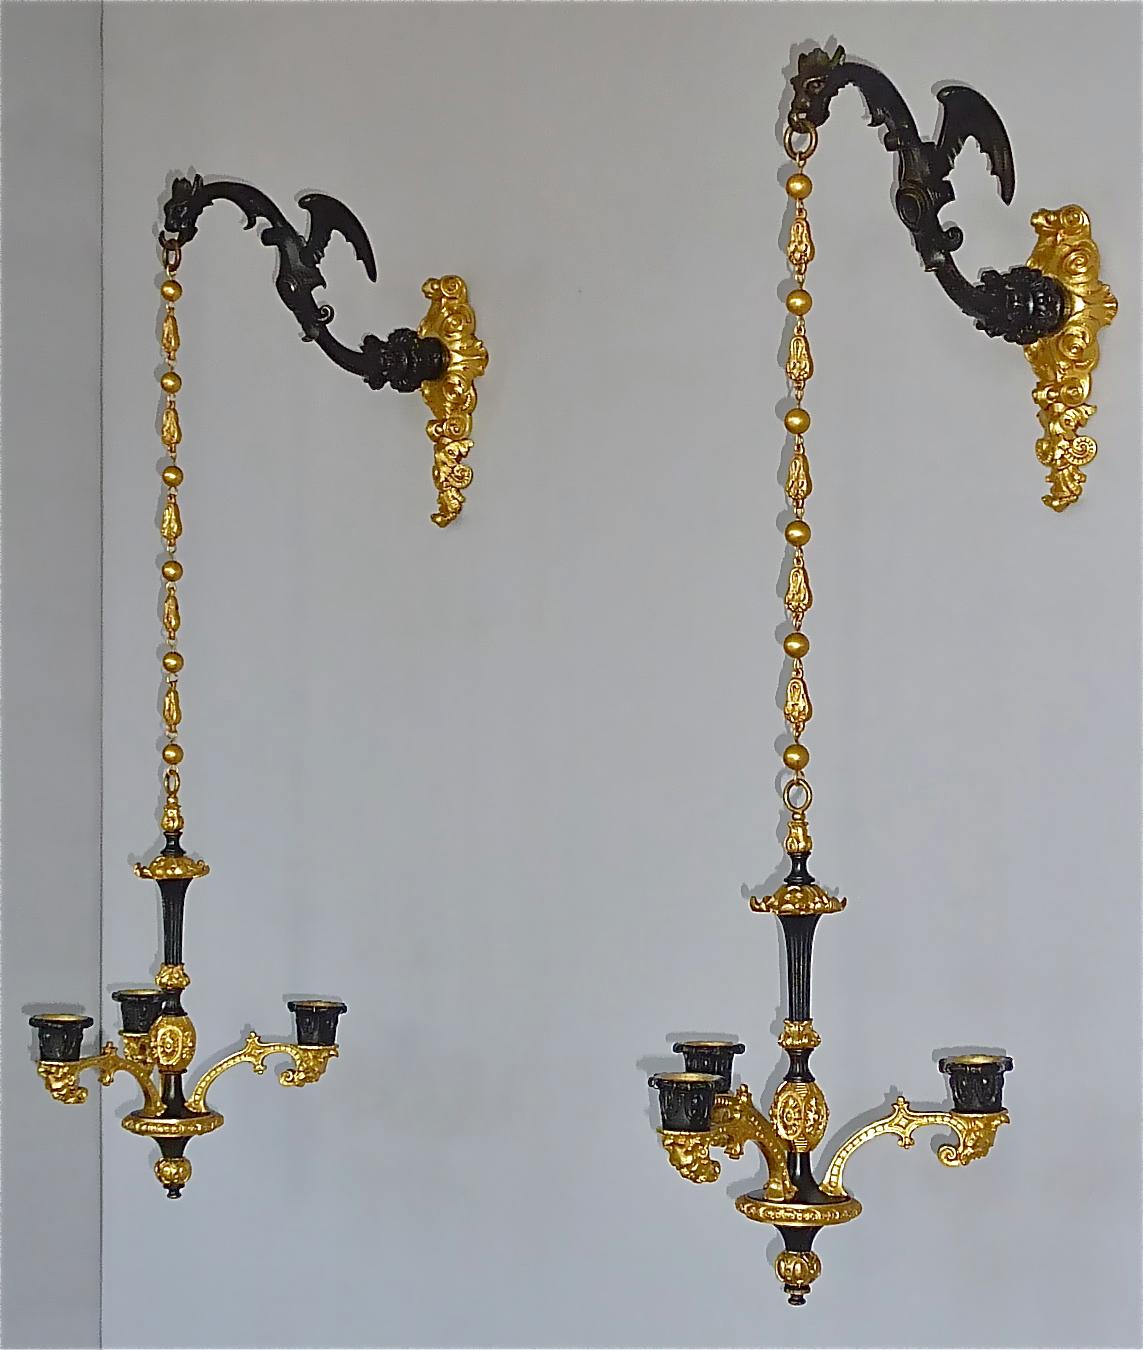 Incredible large french and rare pair of Charles X / Biedermeier winged dragons wall lights or candle holder, France early 19th Century around 1830. The gorgeous antique dragon Gothic style appliques / sconces / wall lamps are made of cast blackened